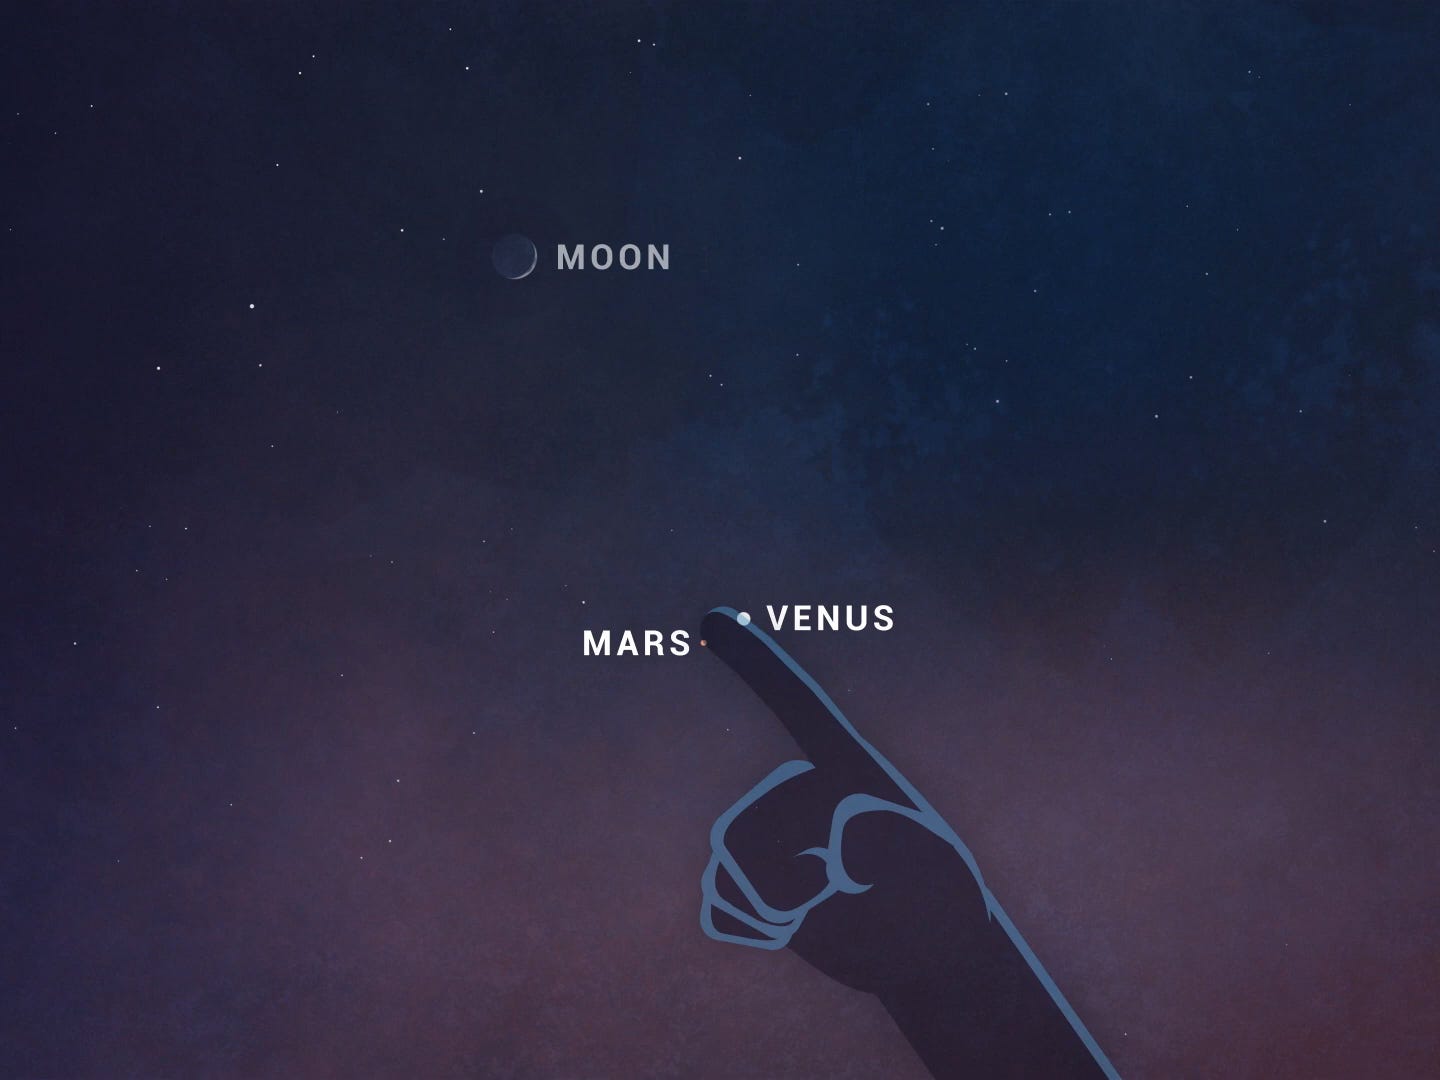 Mars and Venus will appear just a finger's width apart in the night sky